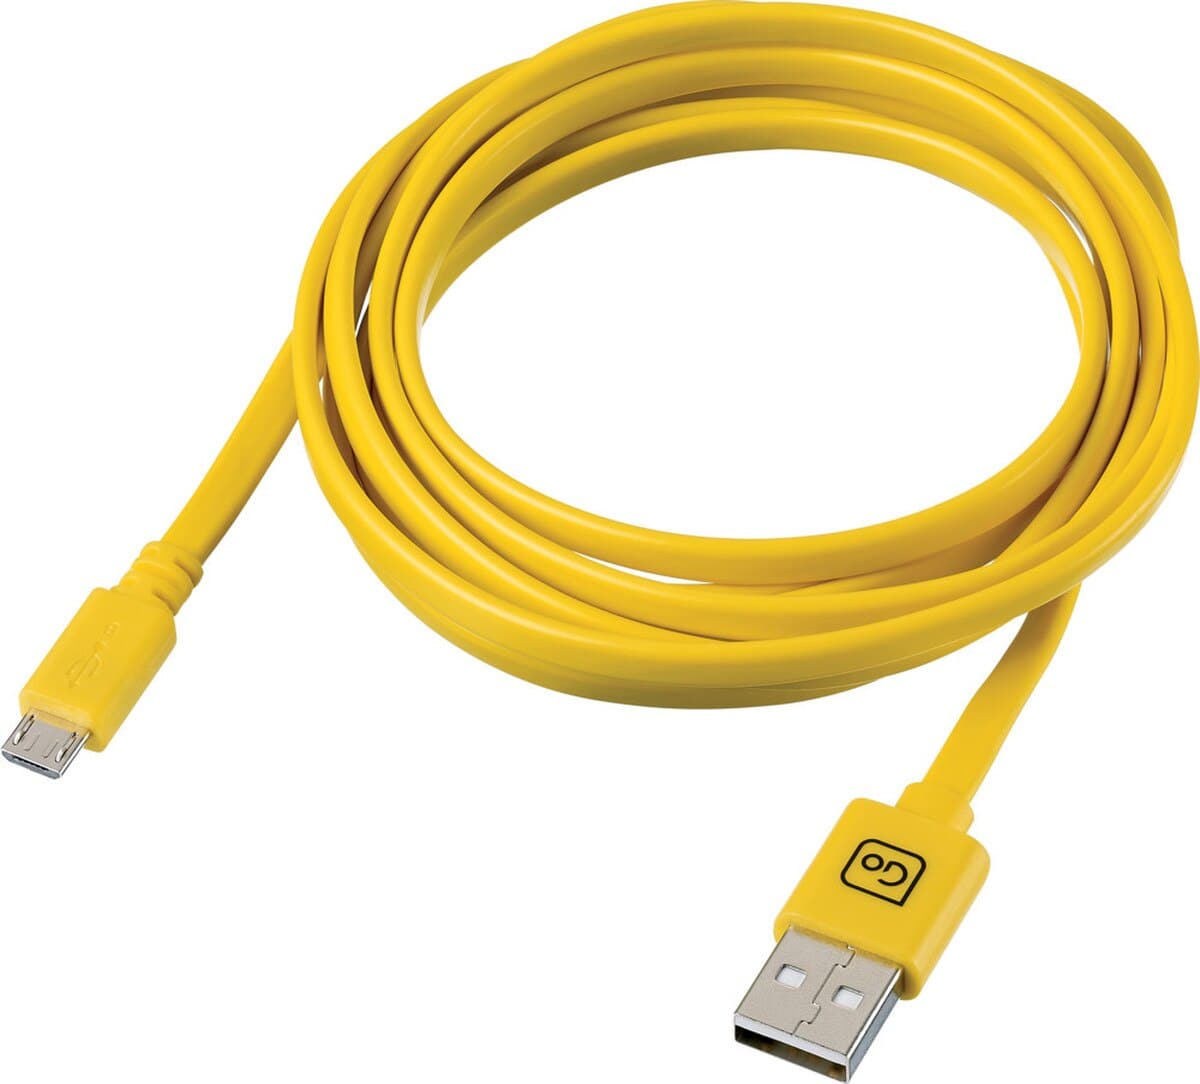 GO TRAVEL 2 METRE USB CABLE YELLOW